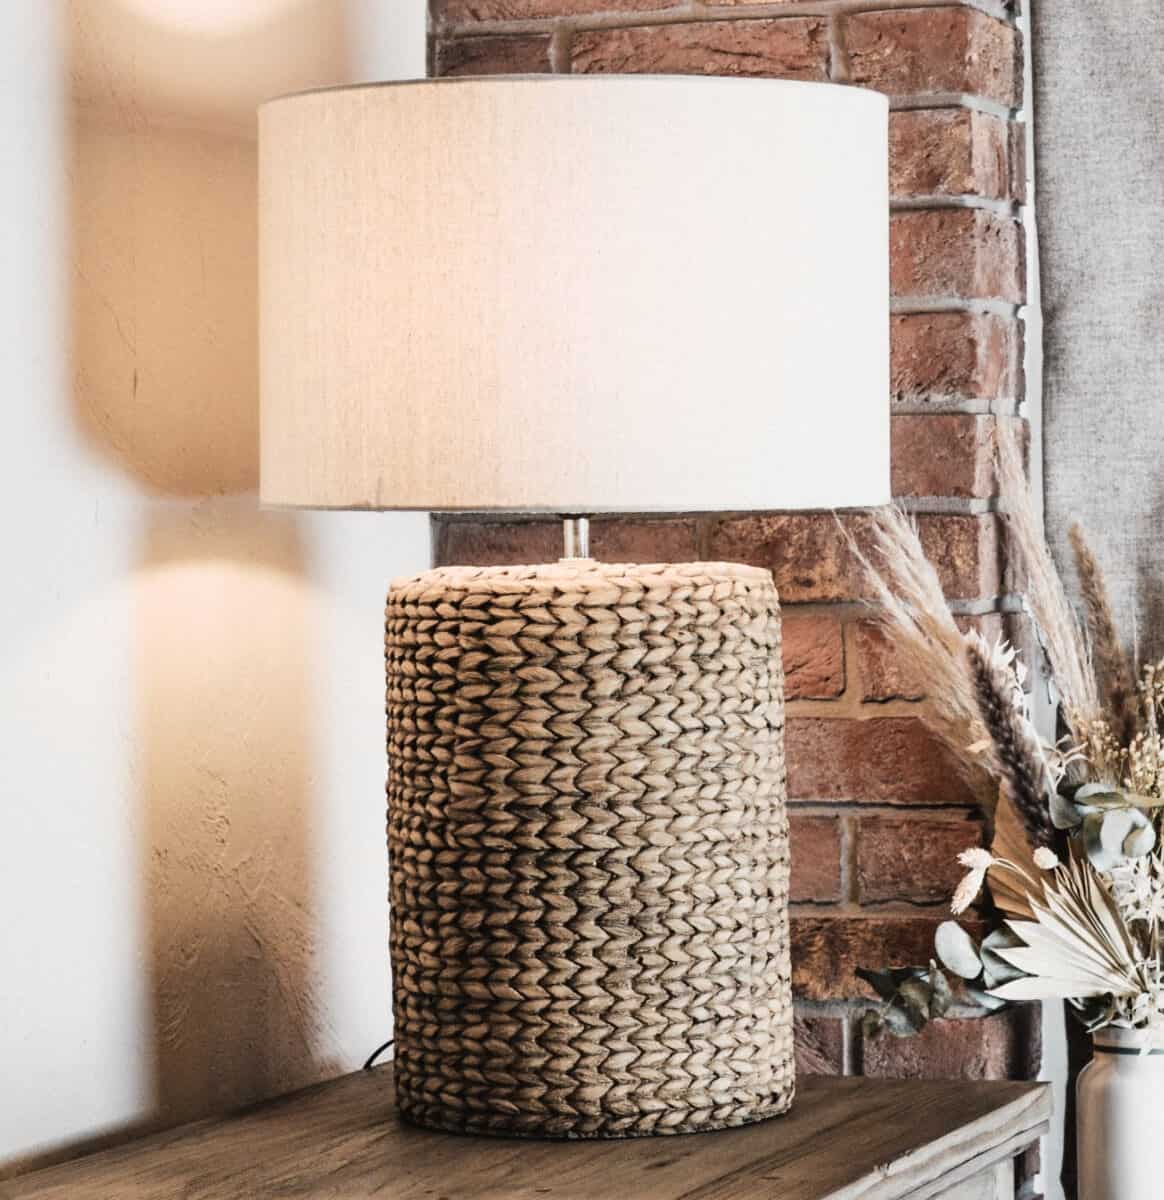 Rope effect tall lamp with light linen shade on wooden console, in front of brick wall.